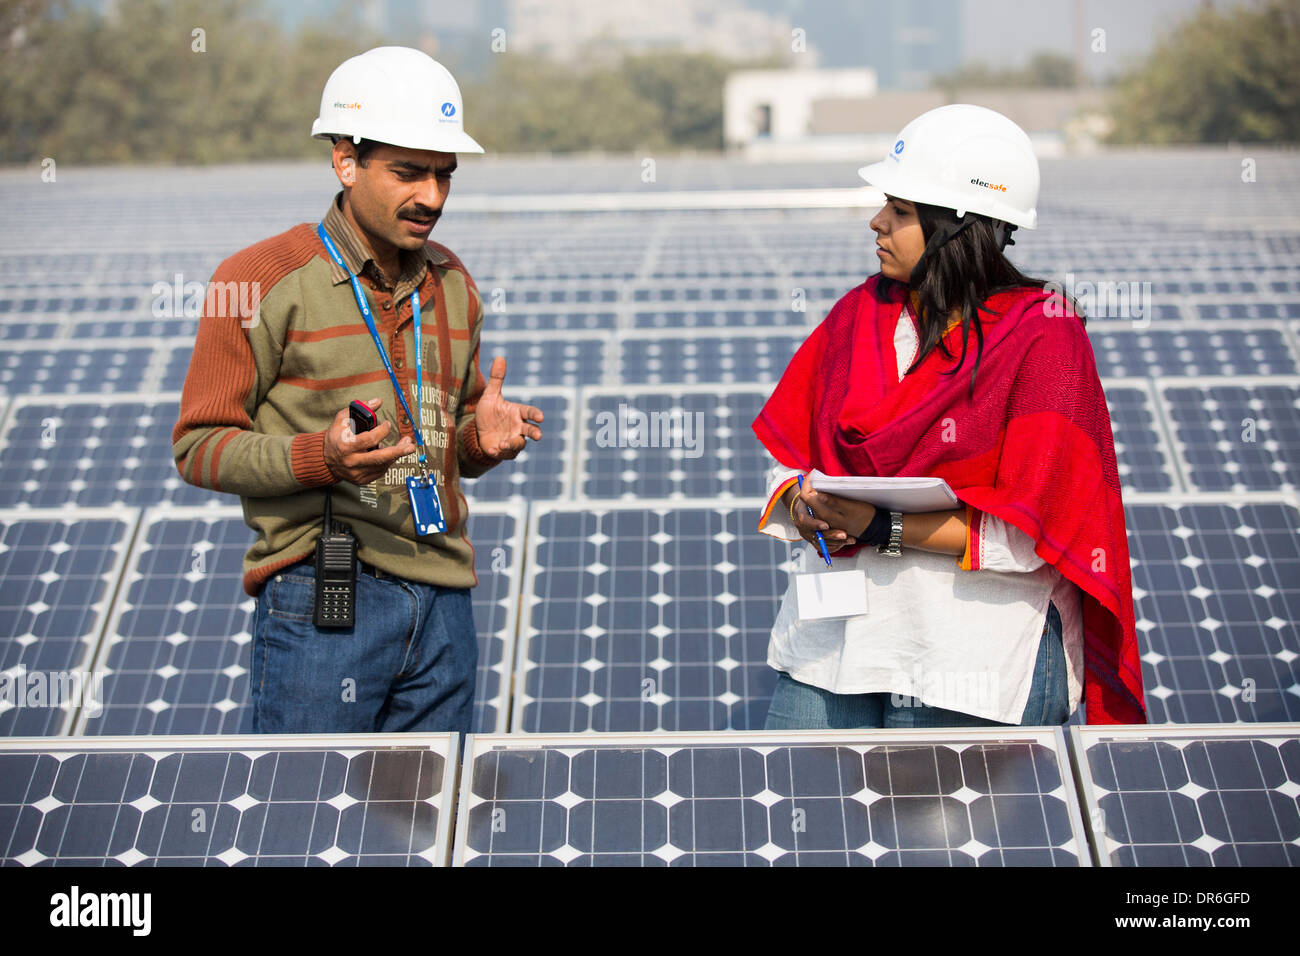 Workers at a 1 MW solar power station run by Tata power on the roof of an electricity company in Delhi, India. Stock Photo